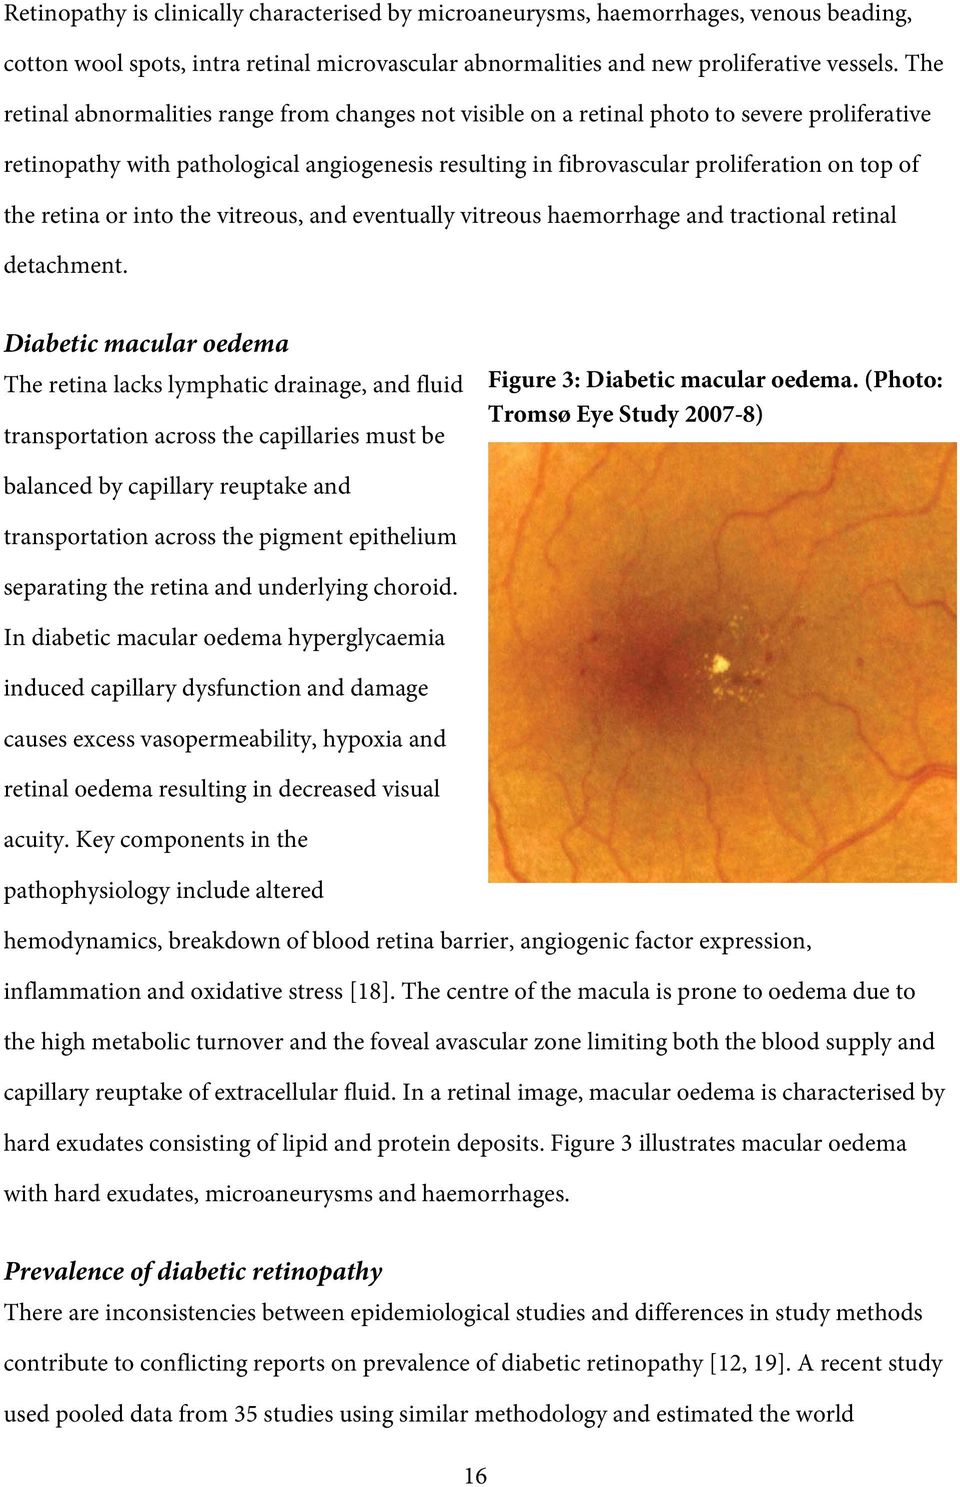 retina or into the vitreous, and eventually vitreous haemorrhage and trational retinal detahment.